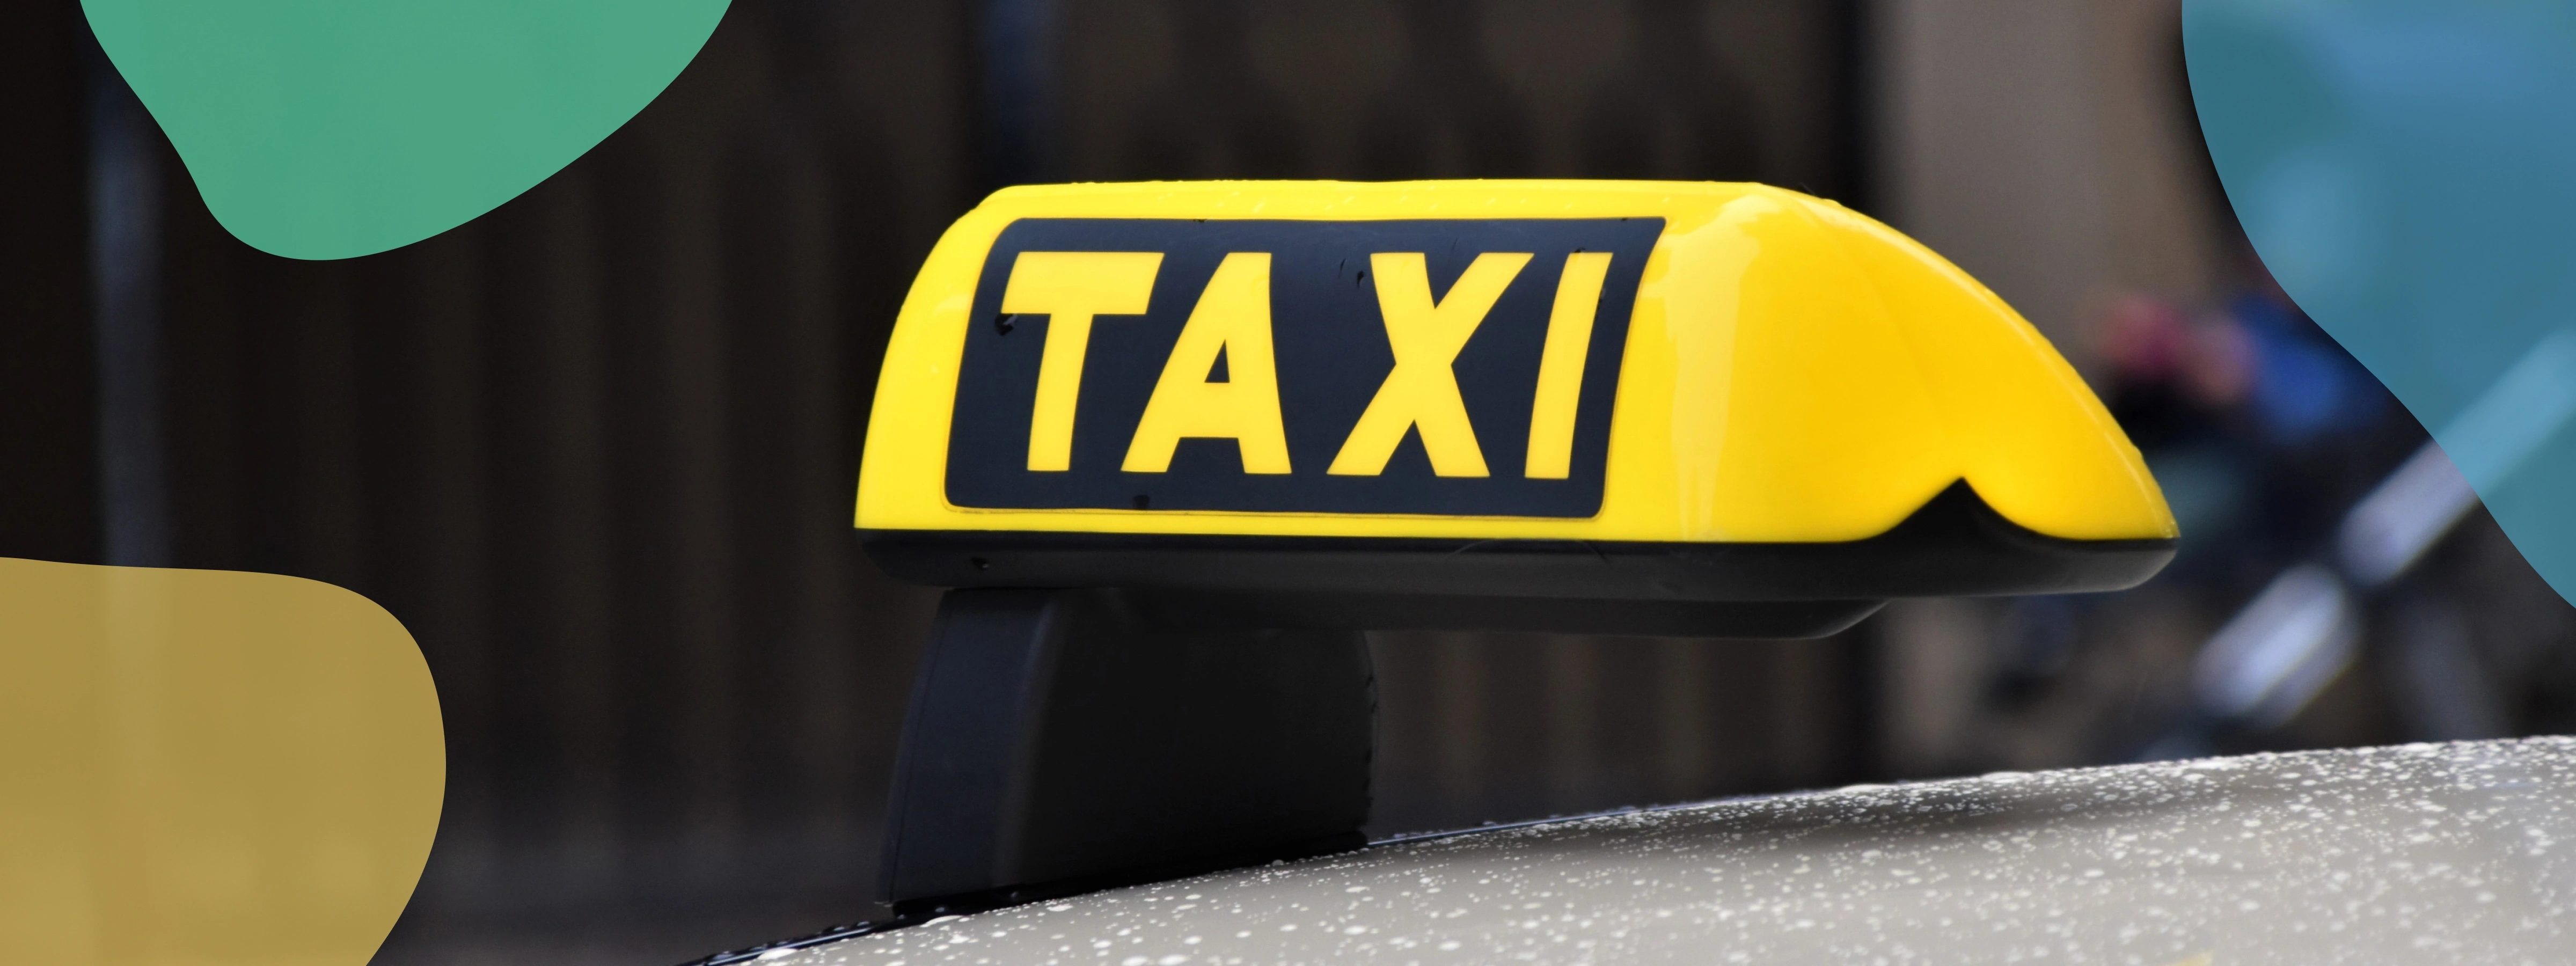 The taxi neon